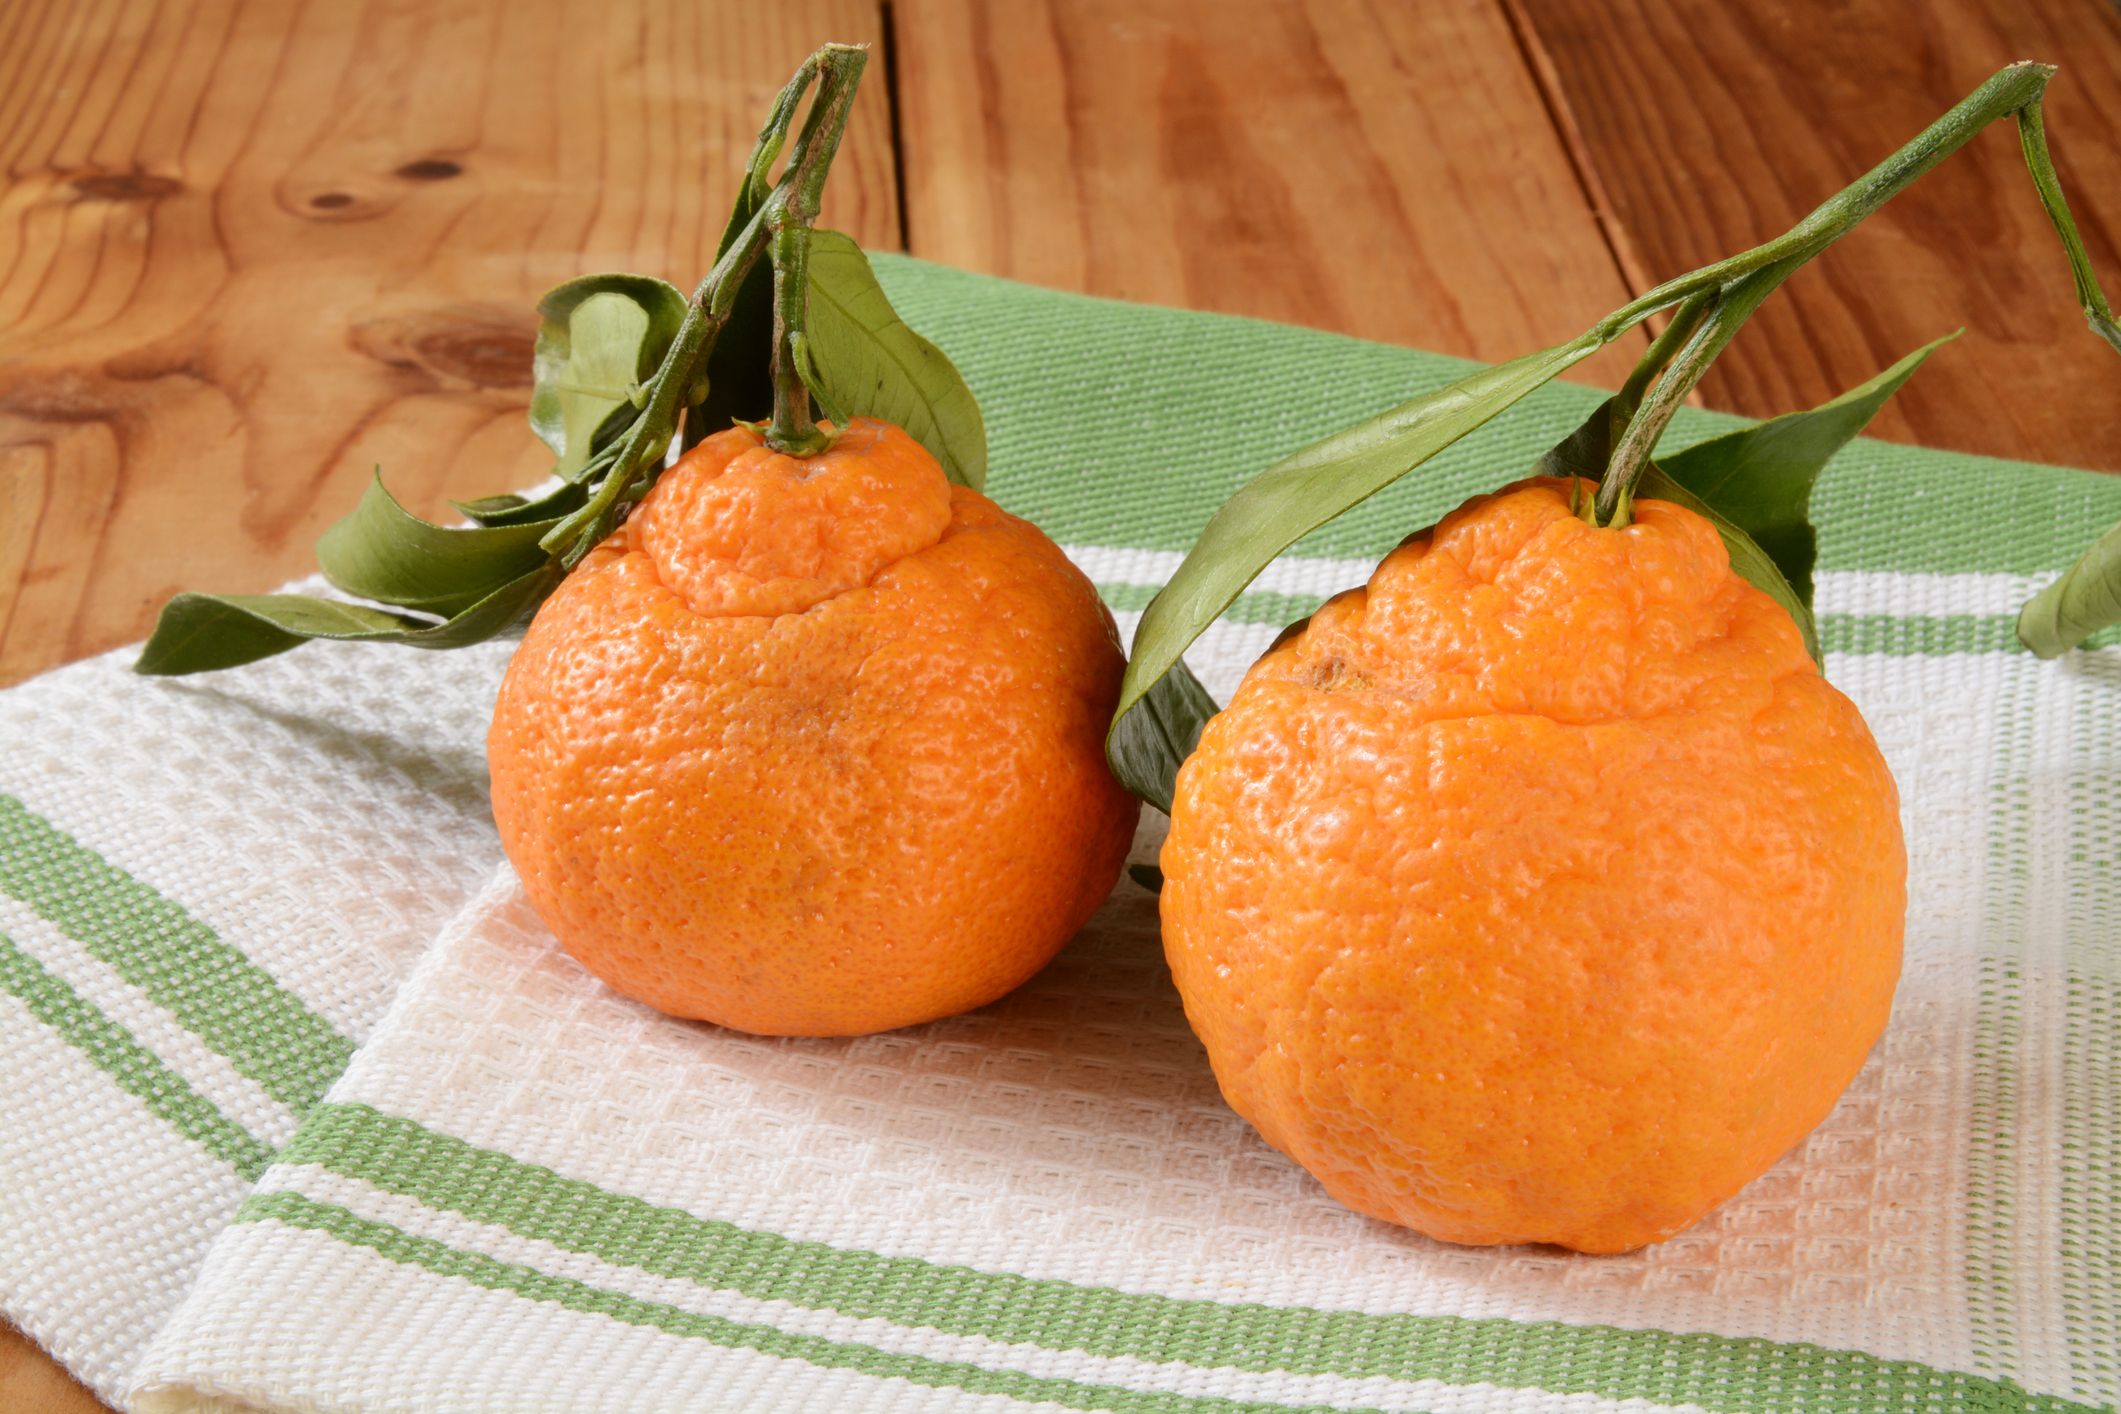 What To Look For When Buying Clementines